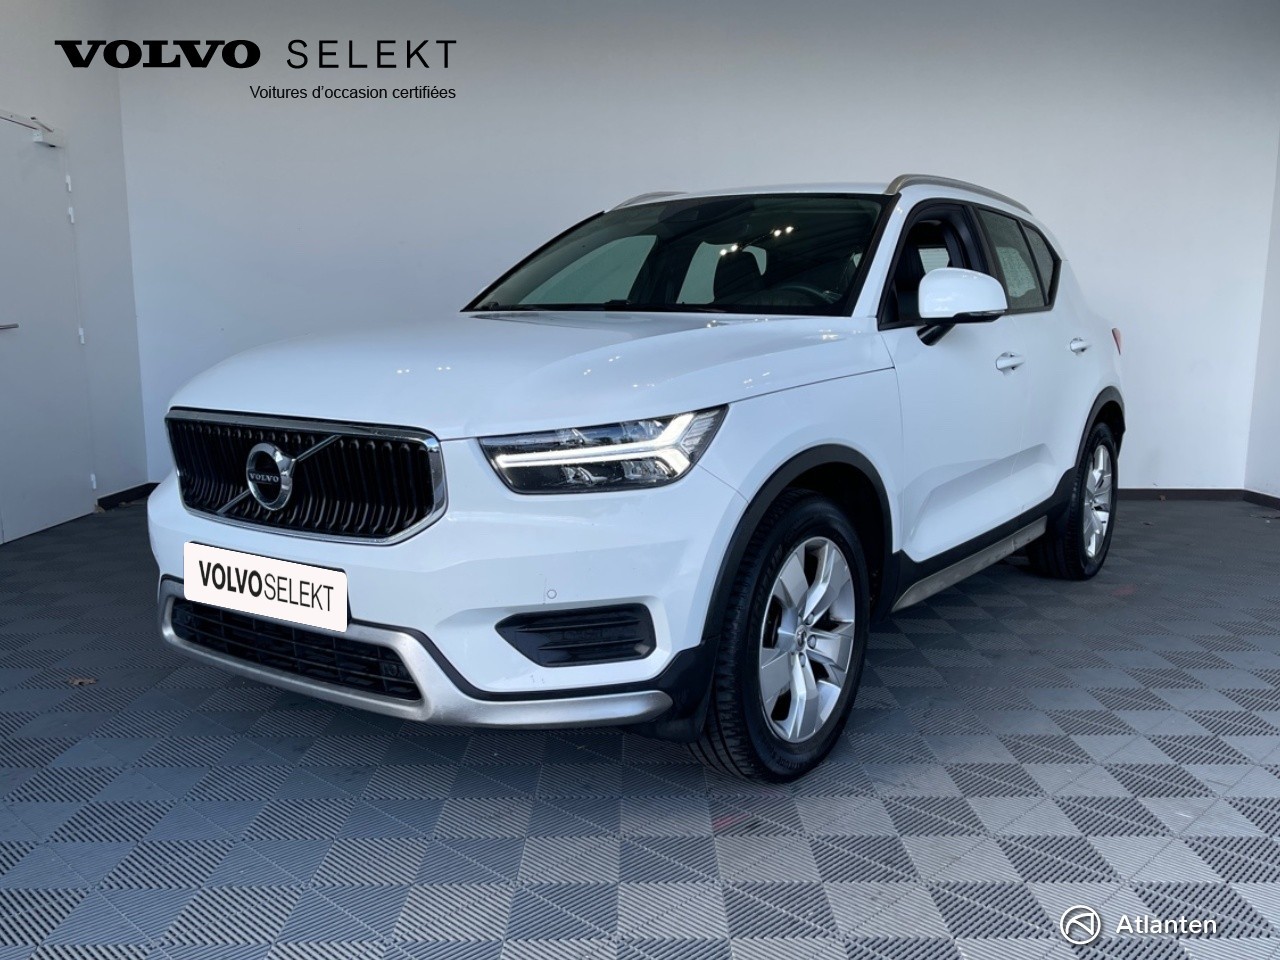 VOLVO XC40 BUSINESS XC40 D4 AWD AdBlue 190 ch Geartronic 8 - Véhicule Occasion Océane Auto